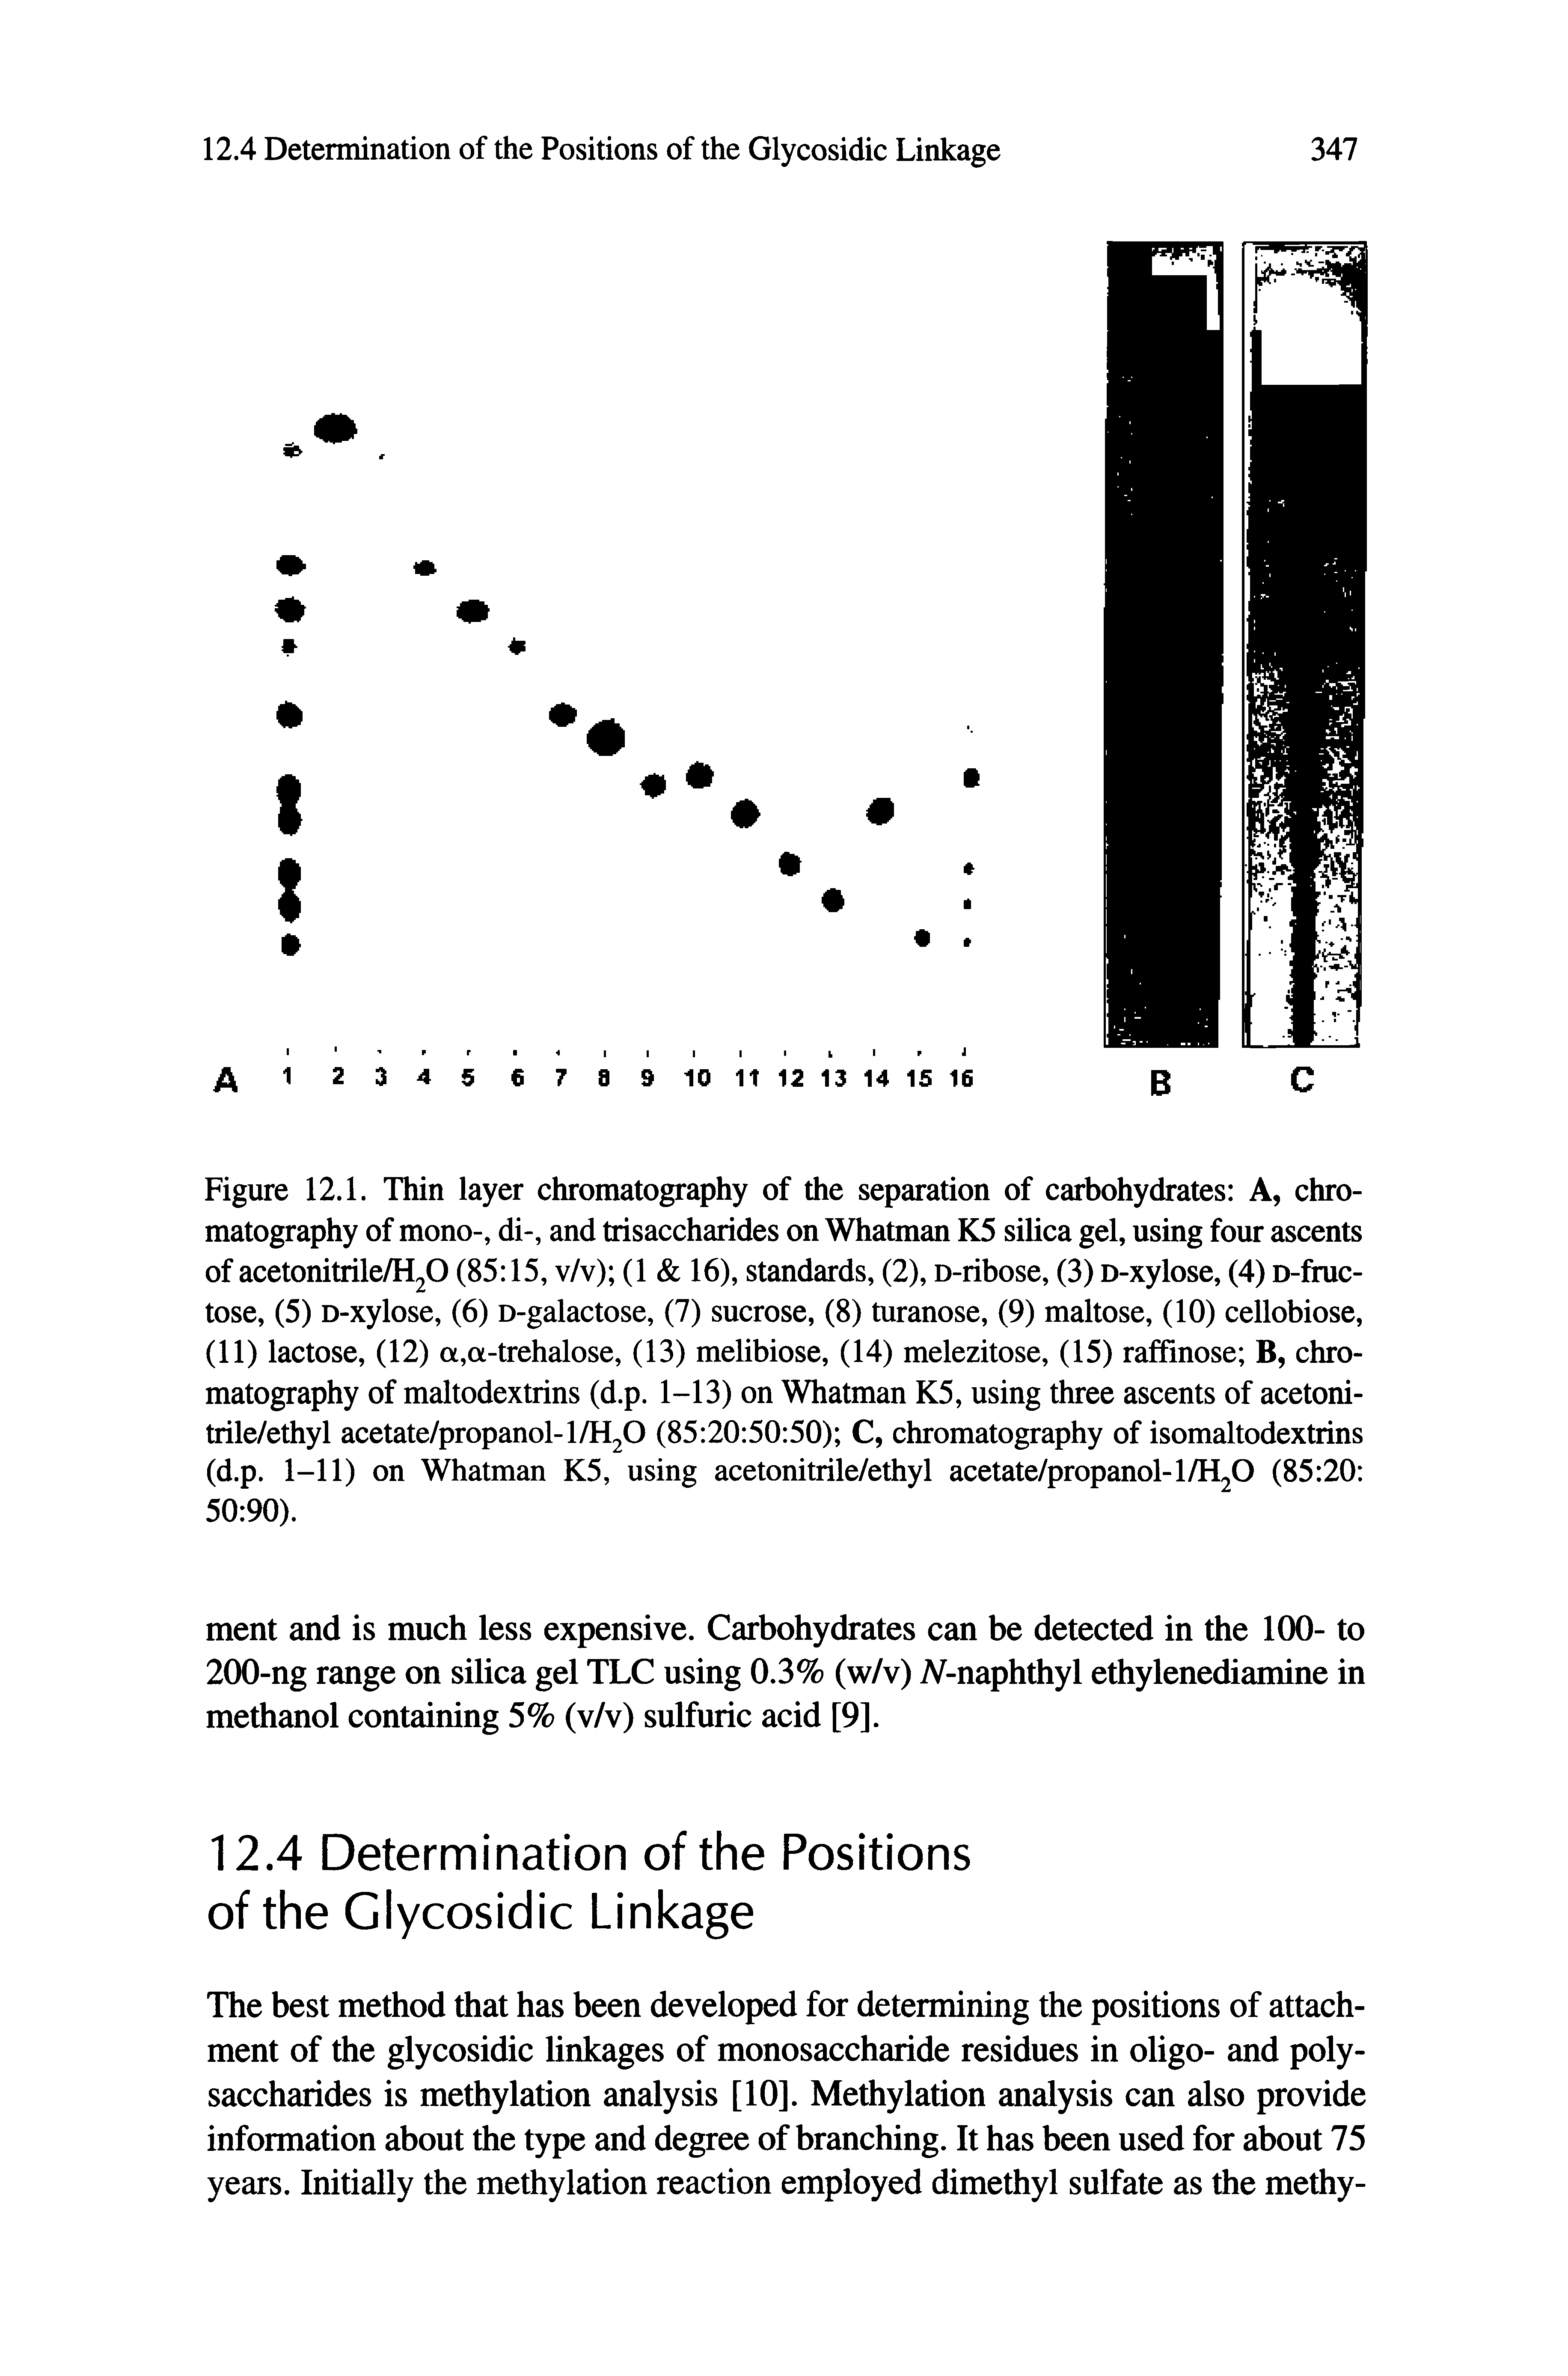 Figure 12.1. Thin layer chromatography of the separation of carbohydrates A, chromatography of mono-, di-, and trisaccharides on Whatman K5 silica gel, using four ascents of acetonitrile/H20 (85 15, v/v) (1 16), standards, (2), D-ribose, (3) D-xylose, (4) D-fruc-tose, (5) D-xylose, (6) D-galactose, (7) sucrose, (8) turanose, (9) maltose, (10) cellobiose, (11) lactose, (12) a,a-trehalose, (13) melibiose, (14) melezitose, (15) raffinose B, chromatography of maltodextrins (d.p. 1-13) on Whatman K5, using three ascents of acetoni-trile/ethyl acetate/propanol-l/H20 (85 20 50 50) C, chromatography of isomaltodextrins (d.p. 1-11) on Whatman K5, using acetonitrile/ethyl acetate/propanol-l/H20 (85 20 50 90).